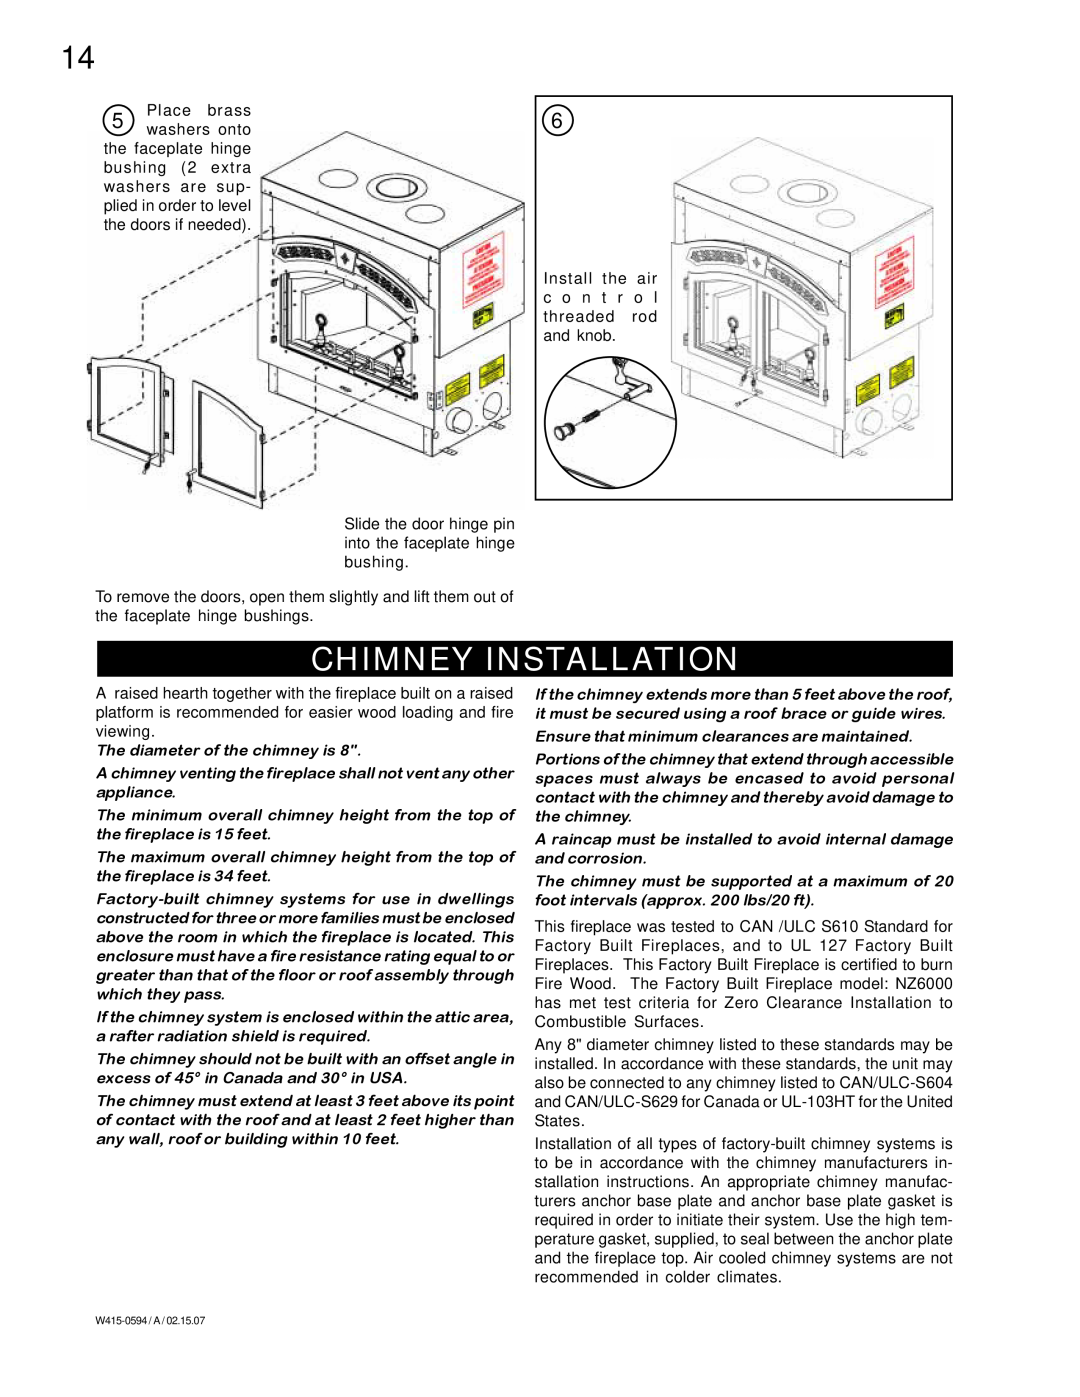 Napoleon Fireplaces NZ6000 manual Chimney Installation, The diameter of the chimney is 